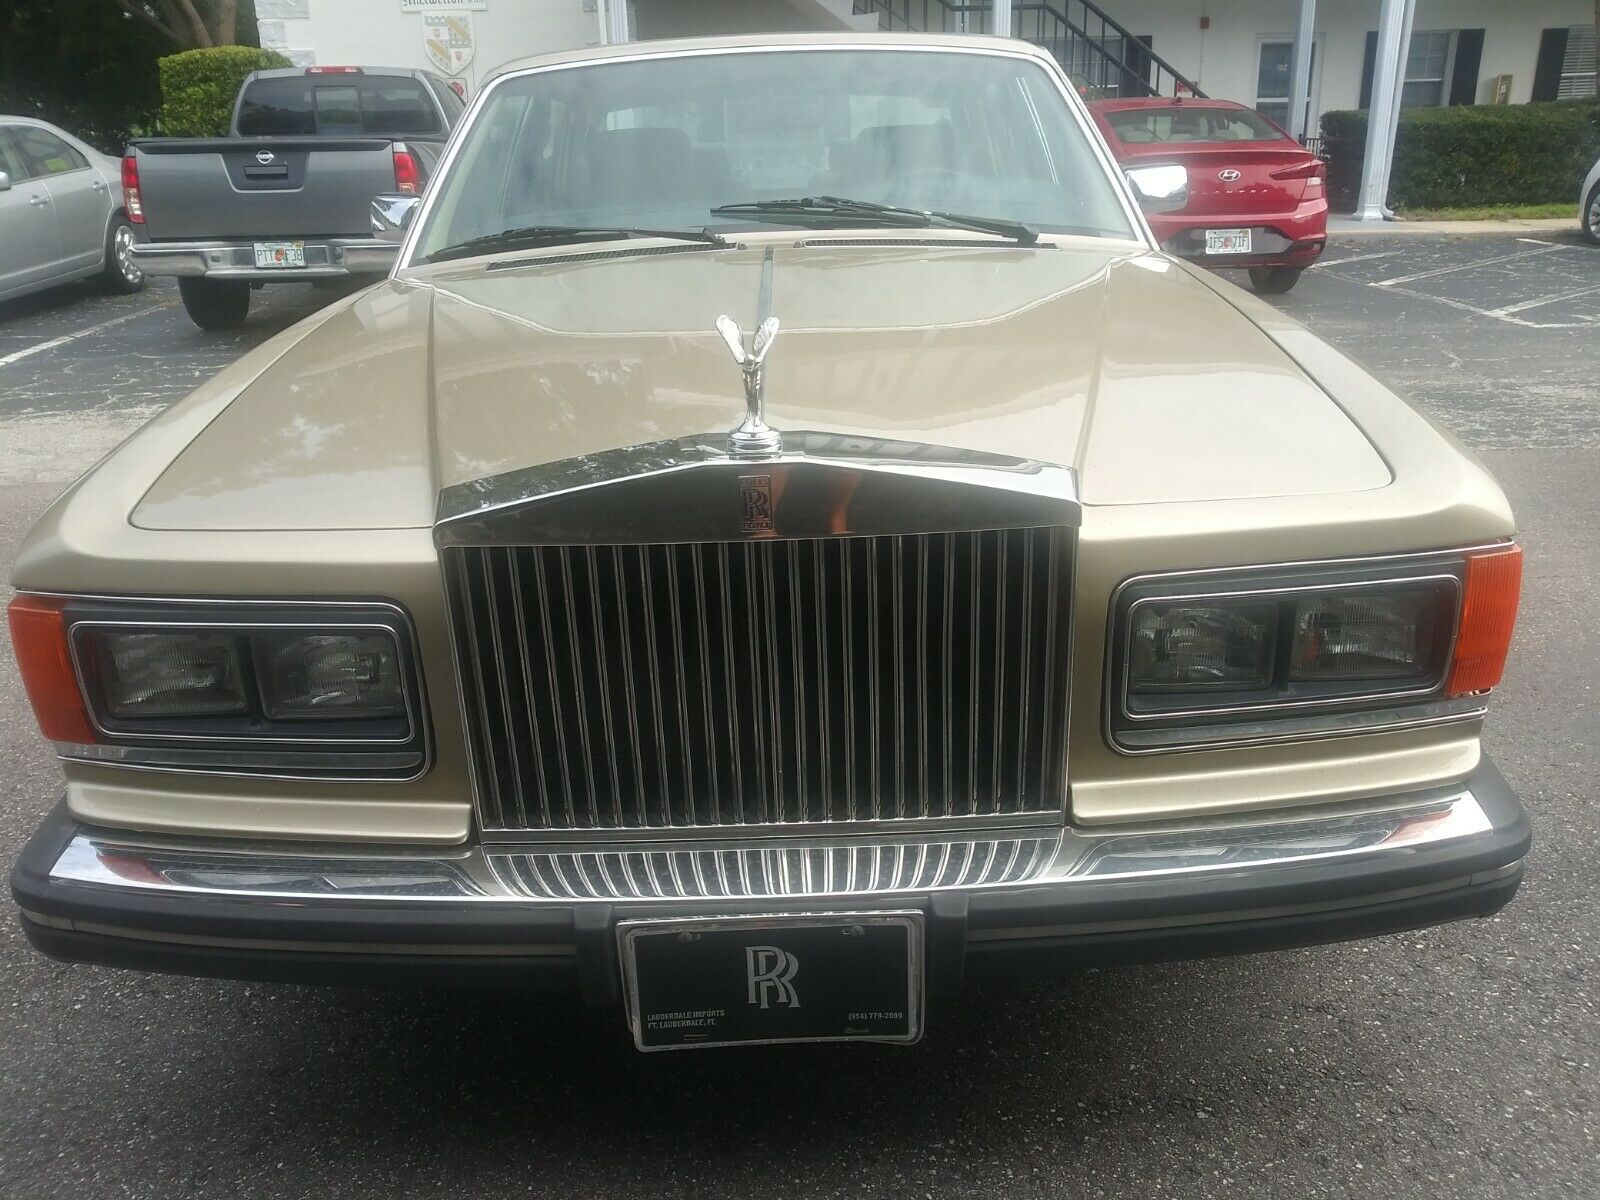 1986 Rolls-royce Other  No Reserve!flawless Paint On This Beautiful Rolls Royce. Interior Good Condition